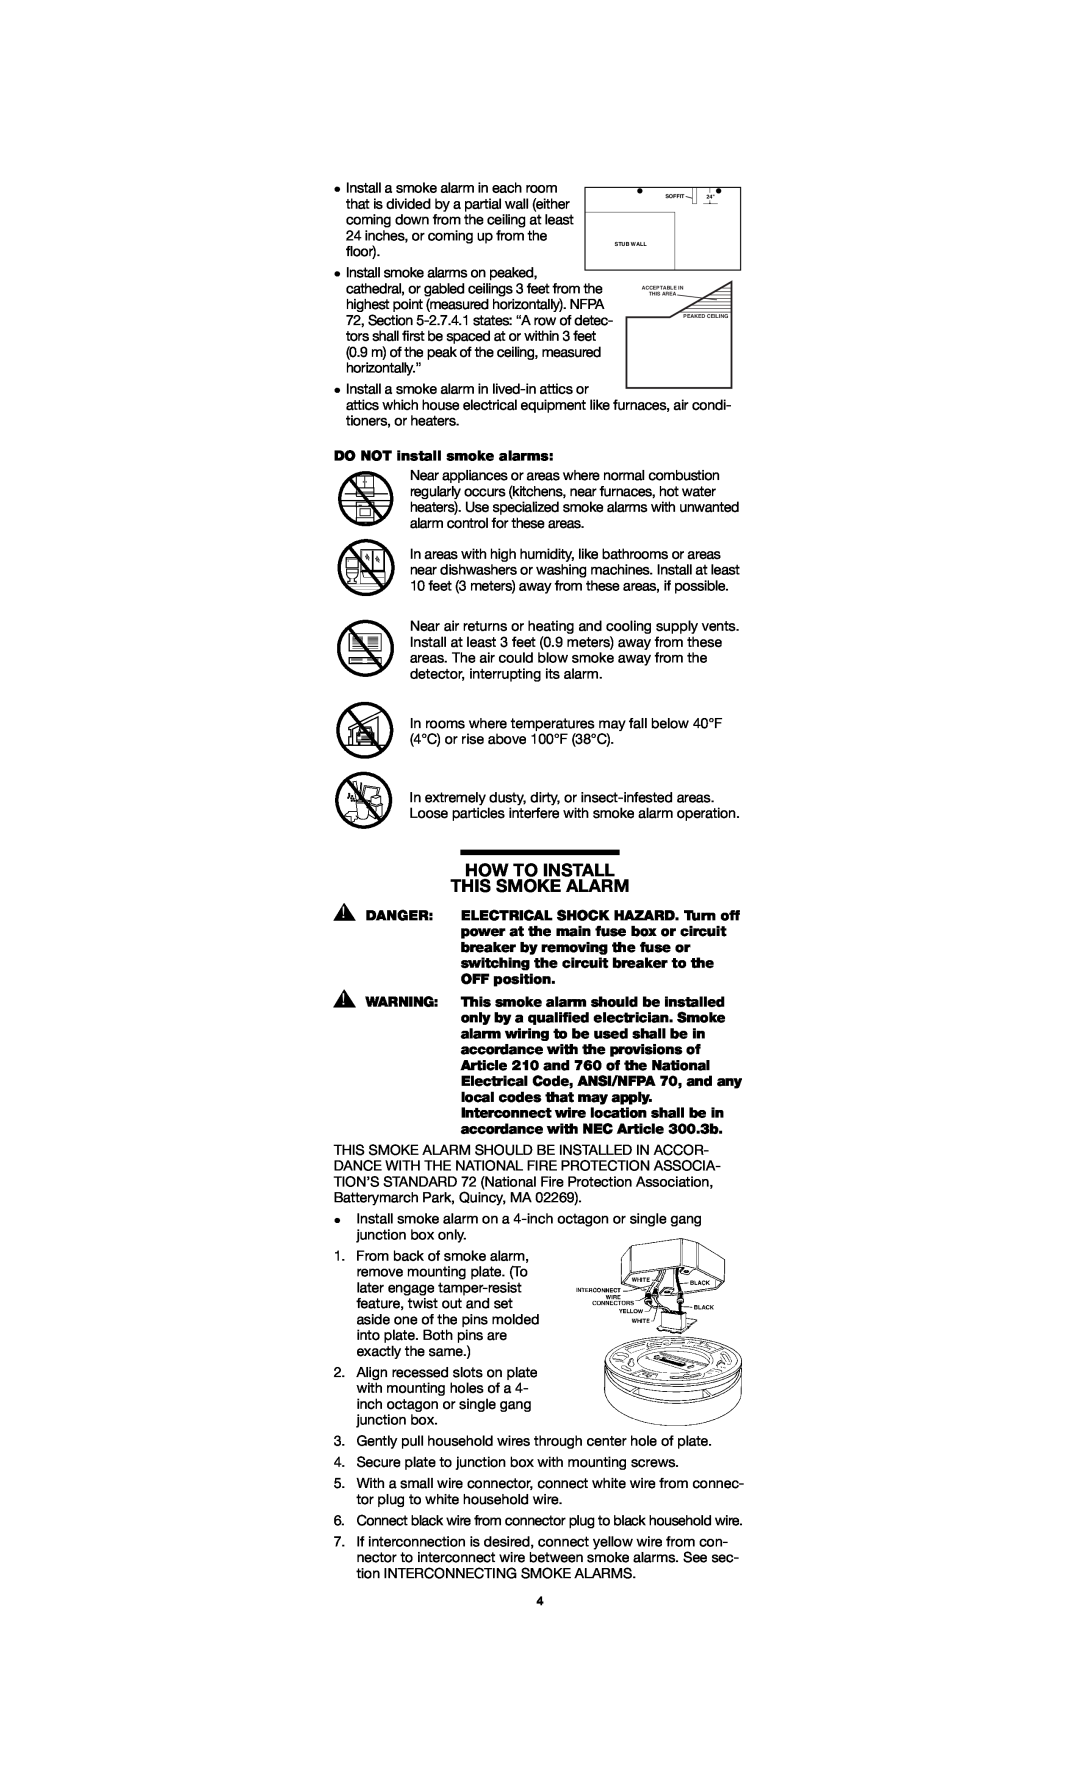 Firex FADC manual How To Install This Smoke Alarm 